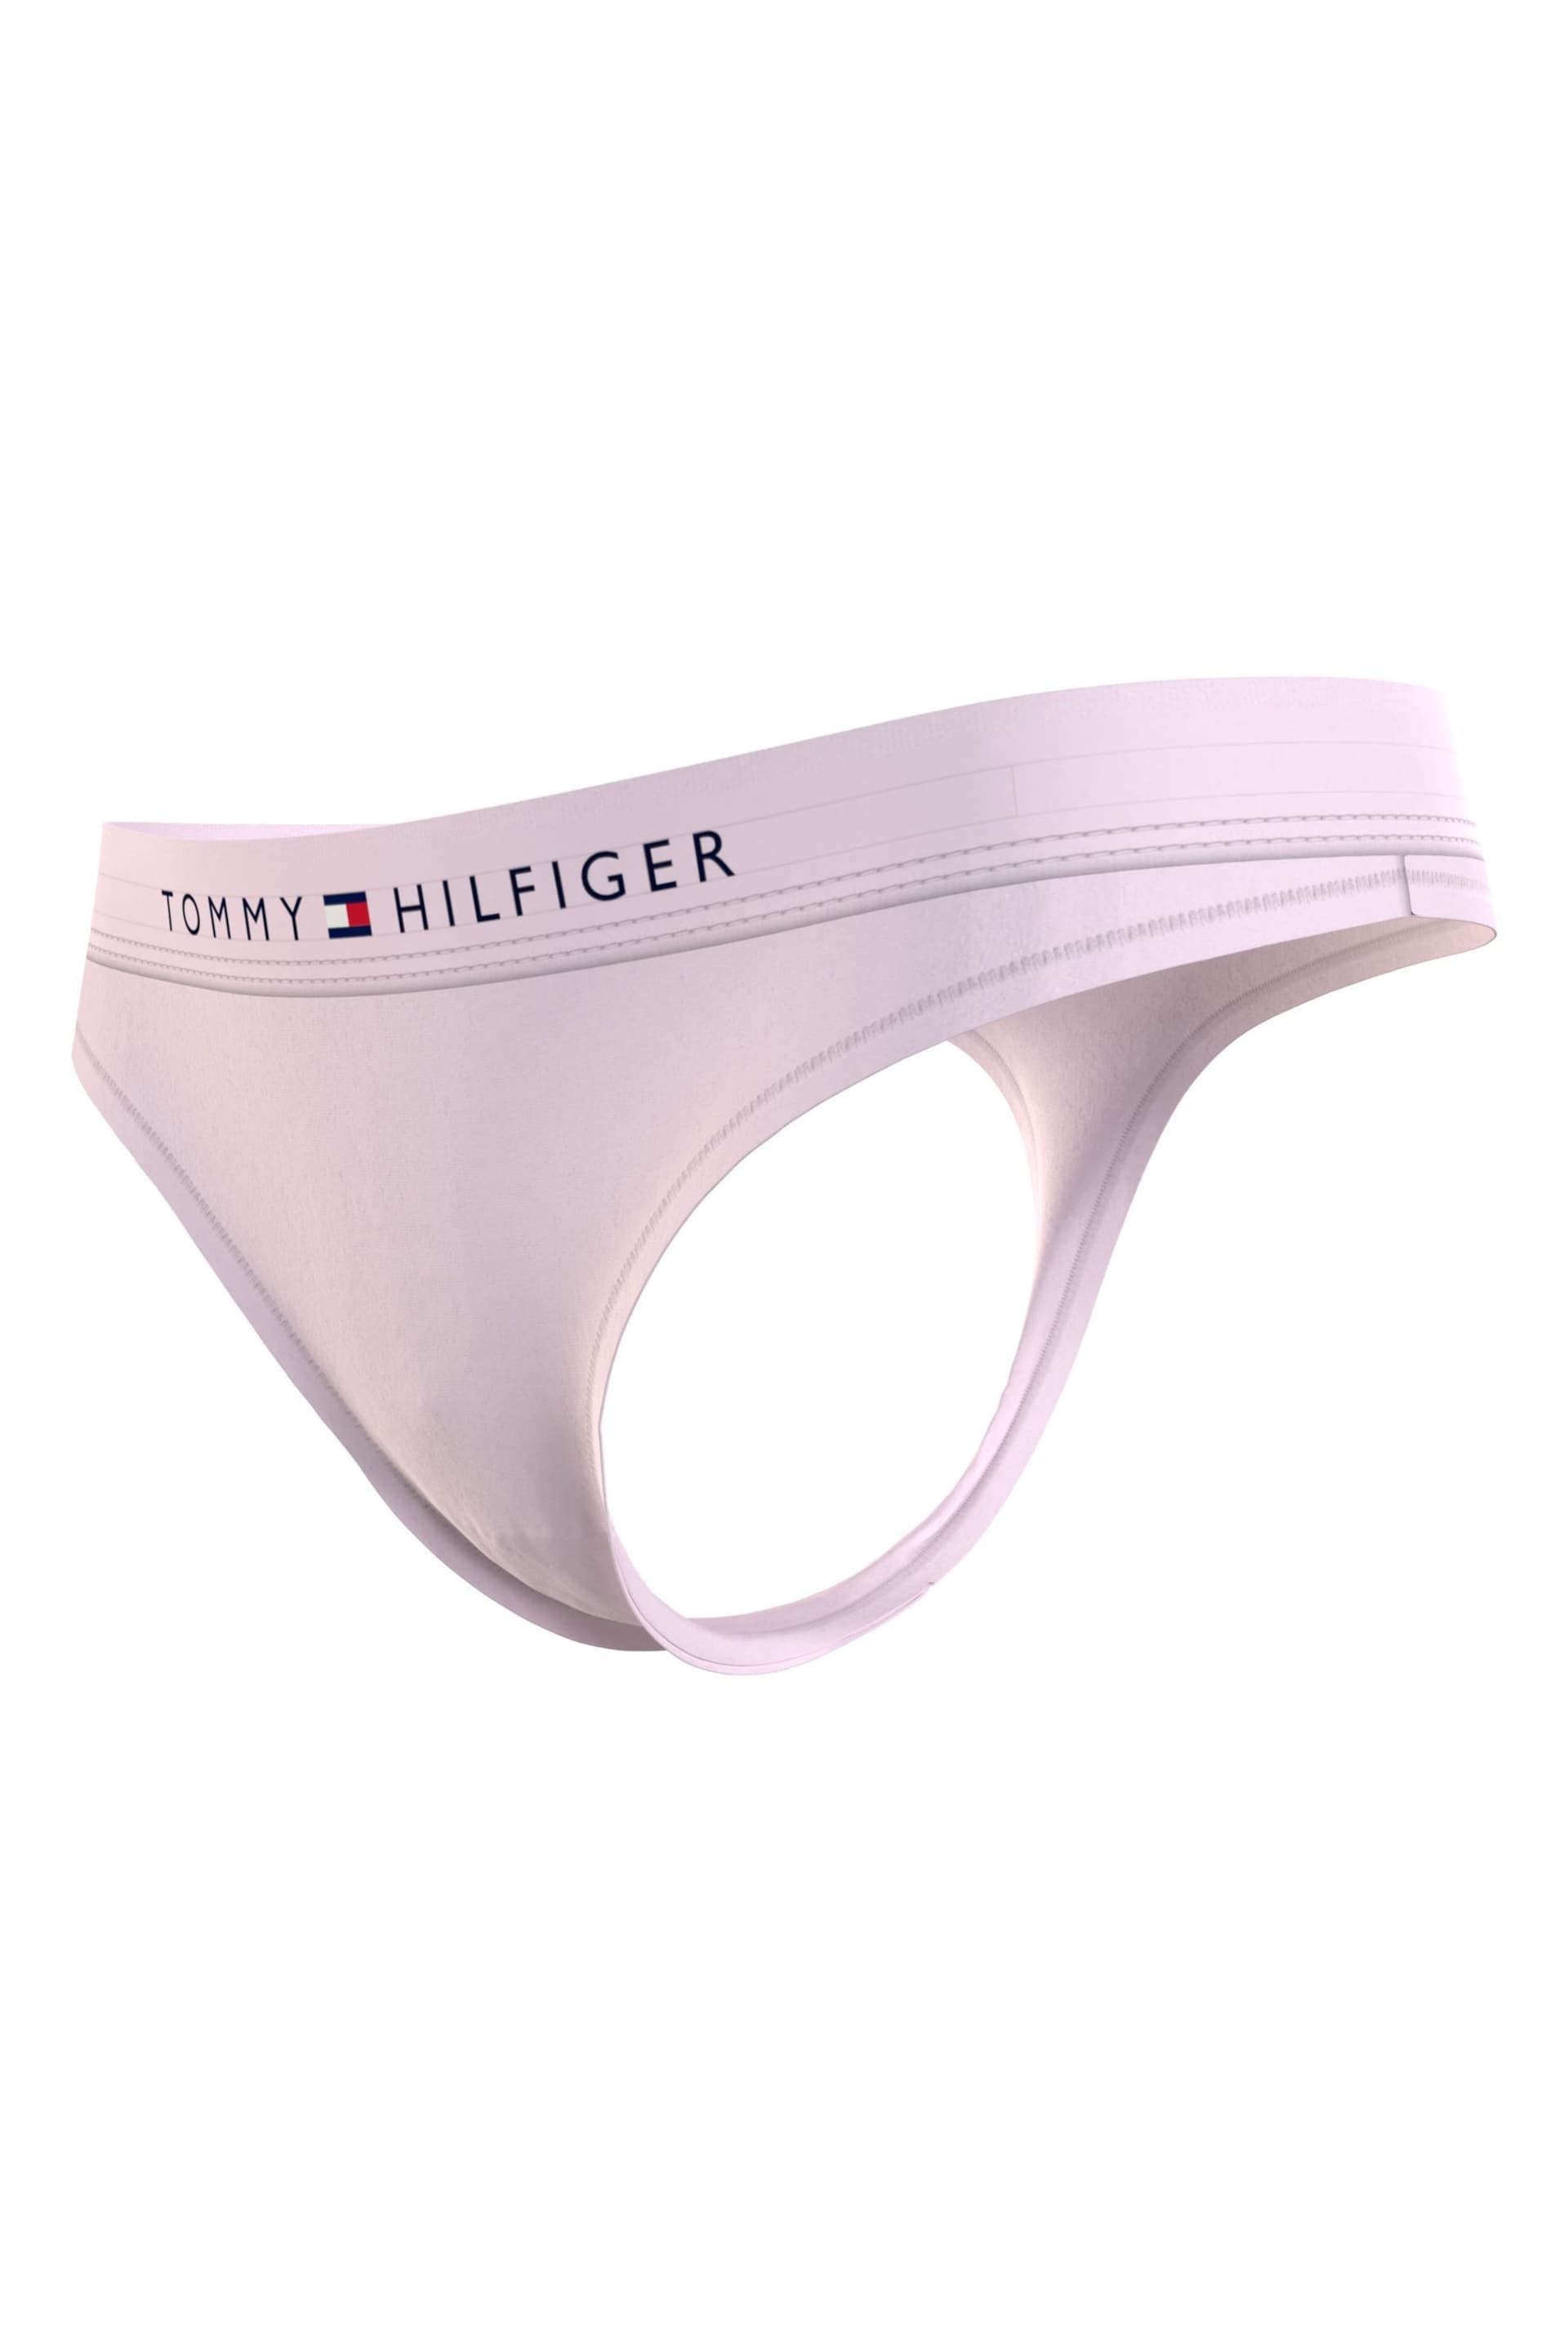 Tommy Hilfiger Pink Thongs - Image 5 of 7